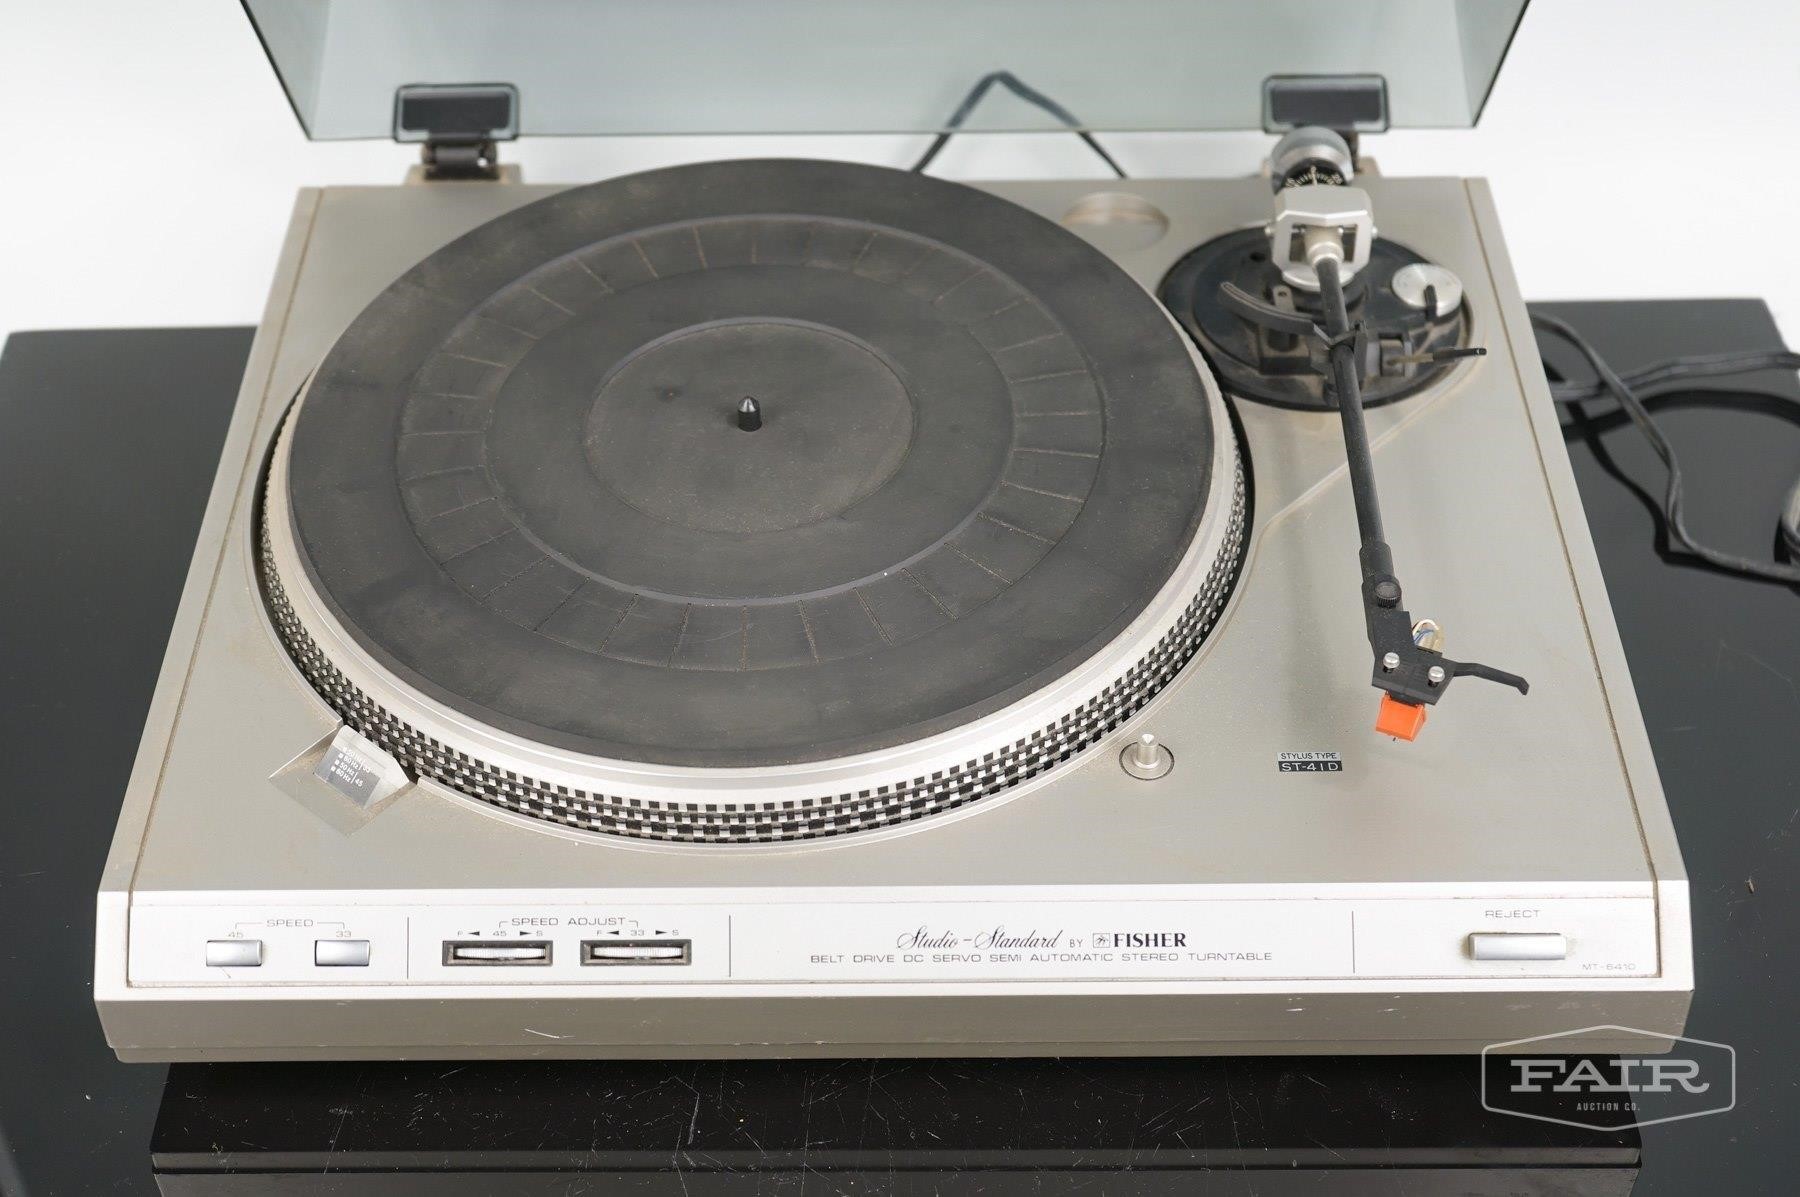 Studio-Standard by Fisher Stereo Turntable | Fair Auction Company, LLC